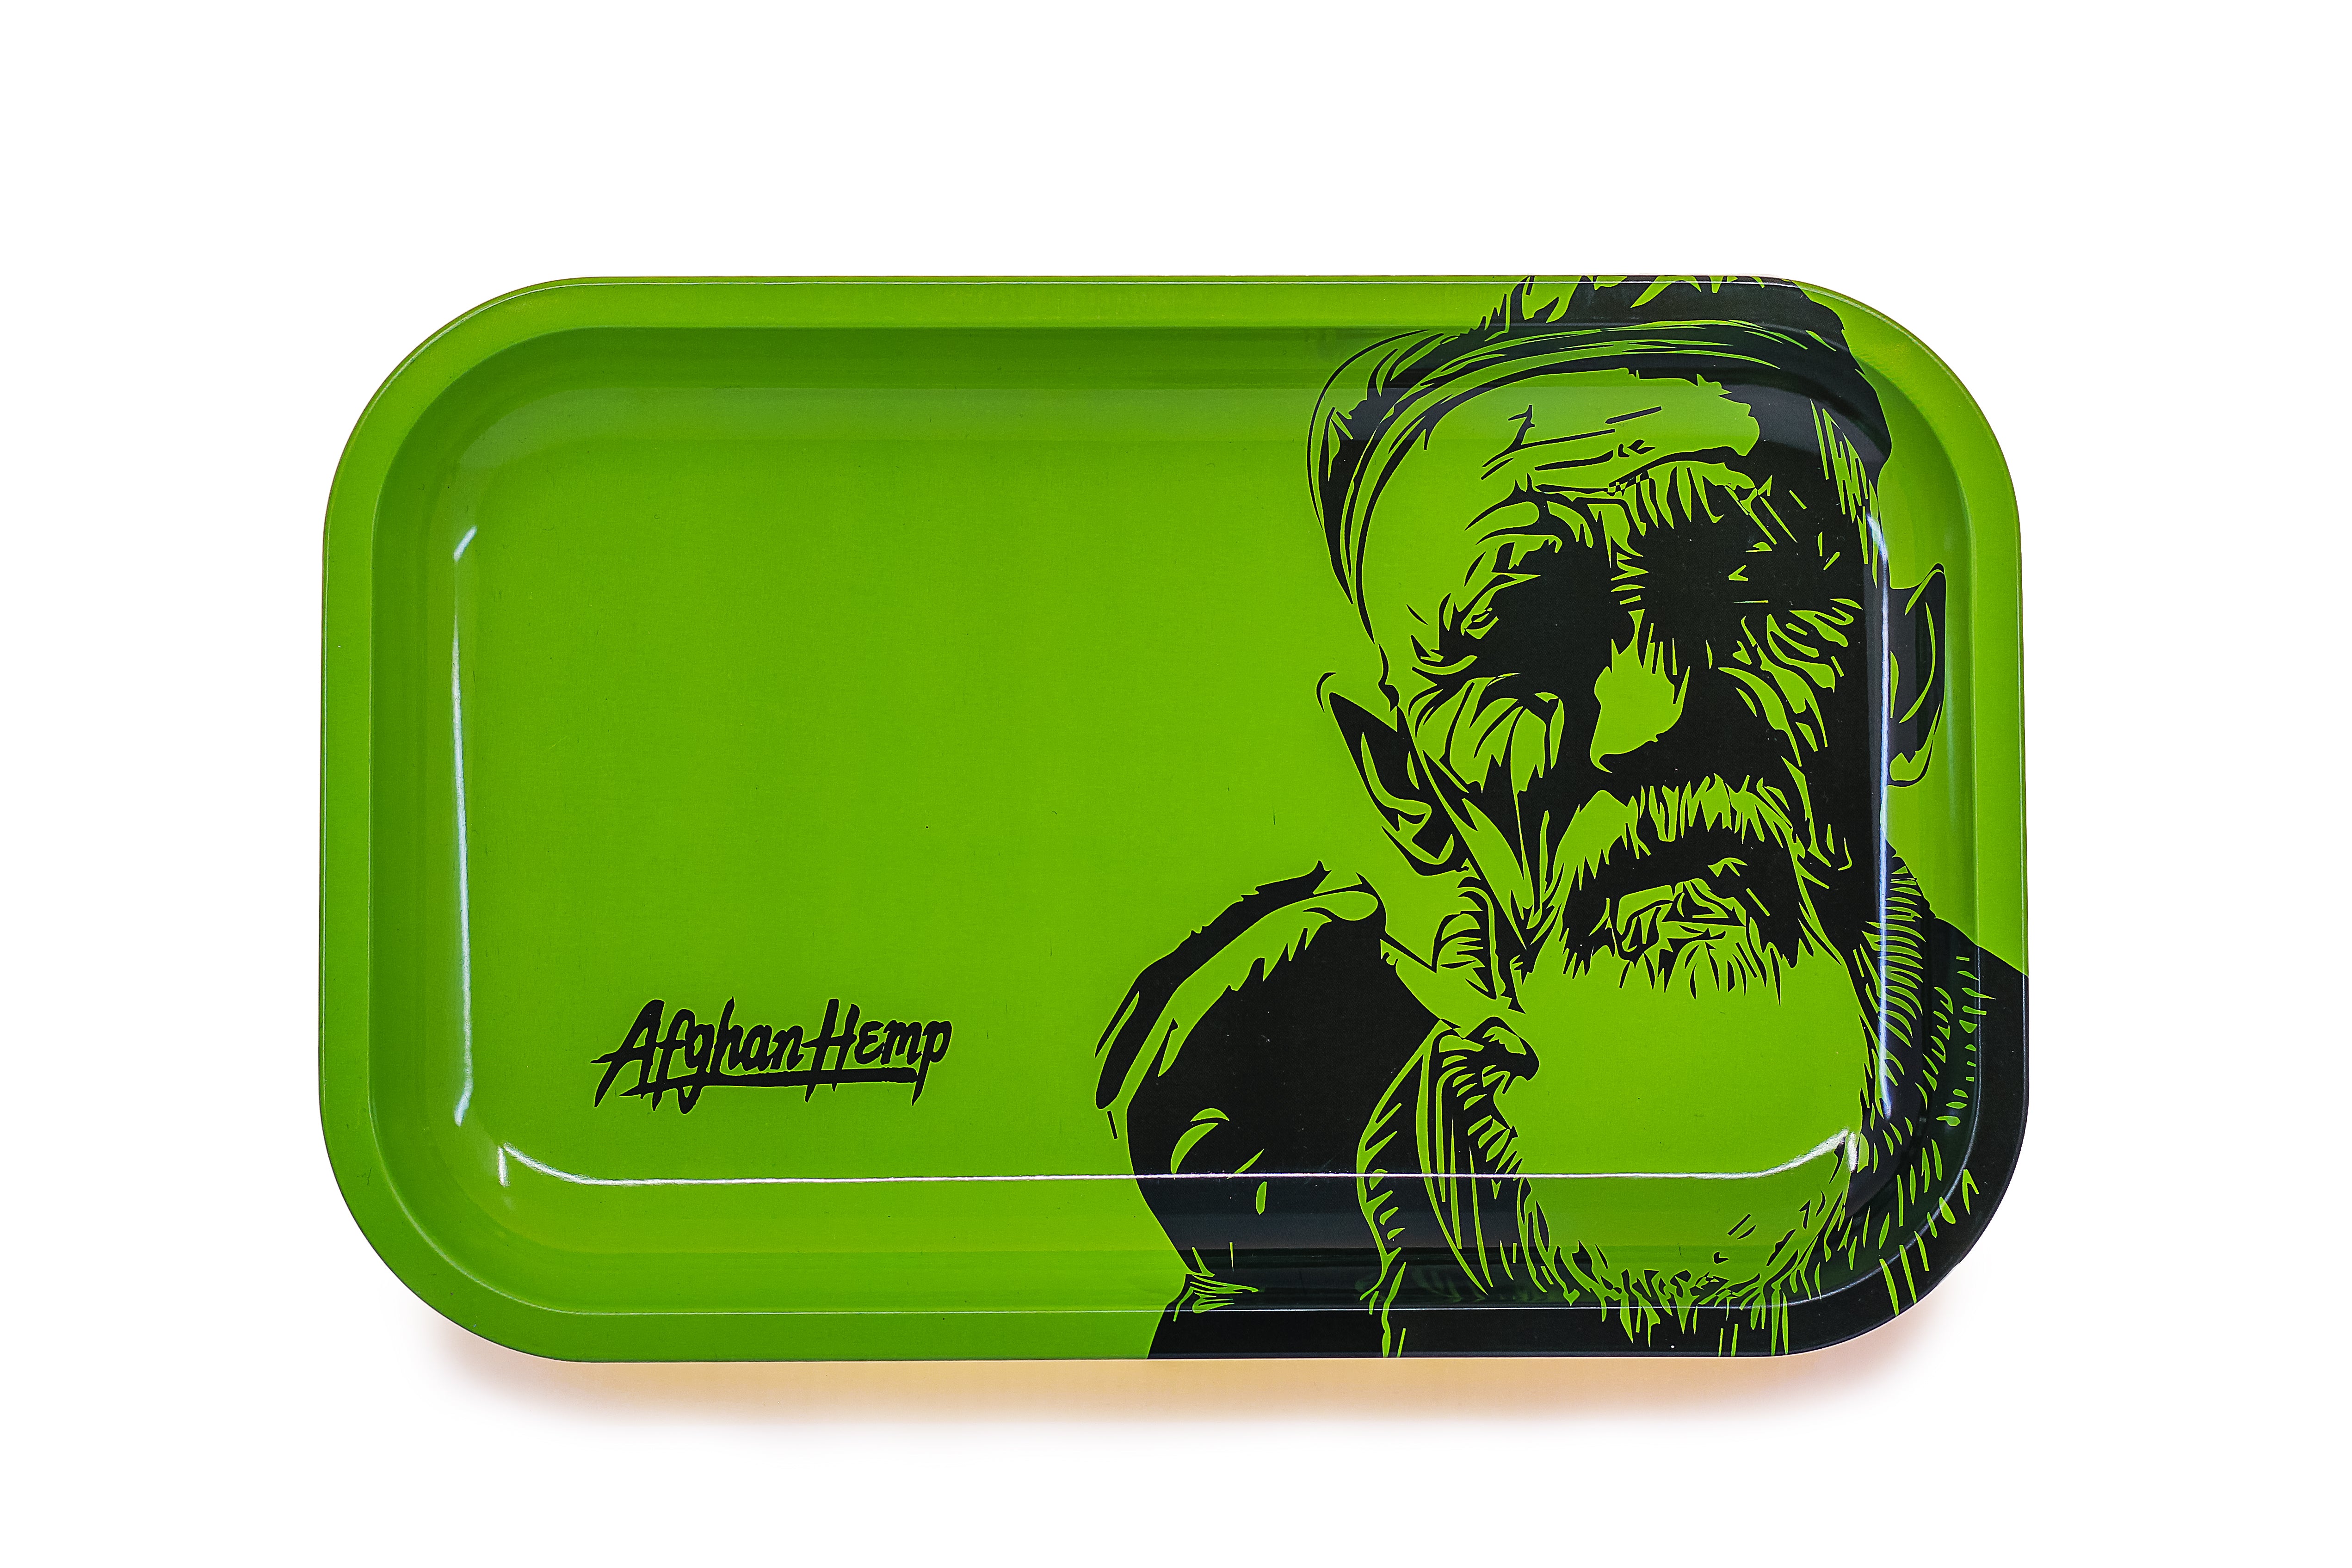 Roll A Perfect J Each Time With The Durable Afghan Hemp Metal Rolling Tray